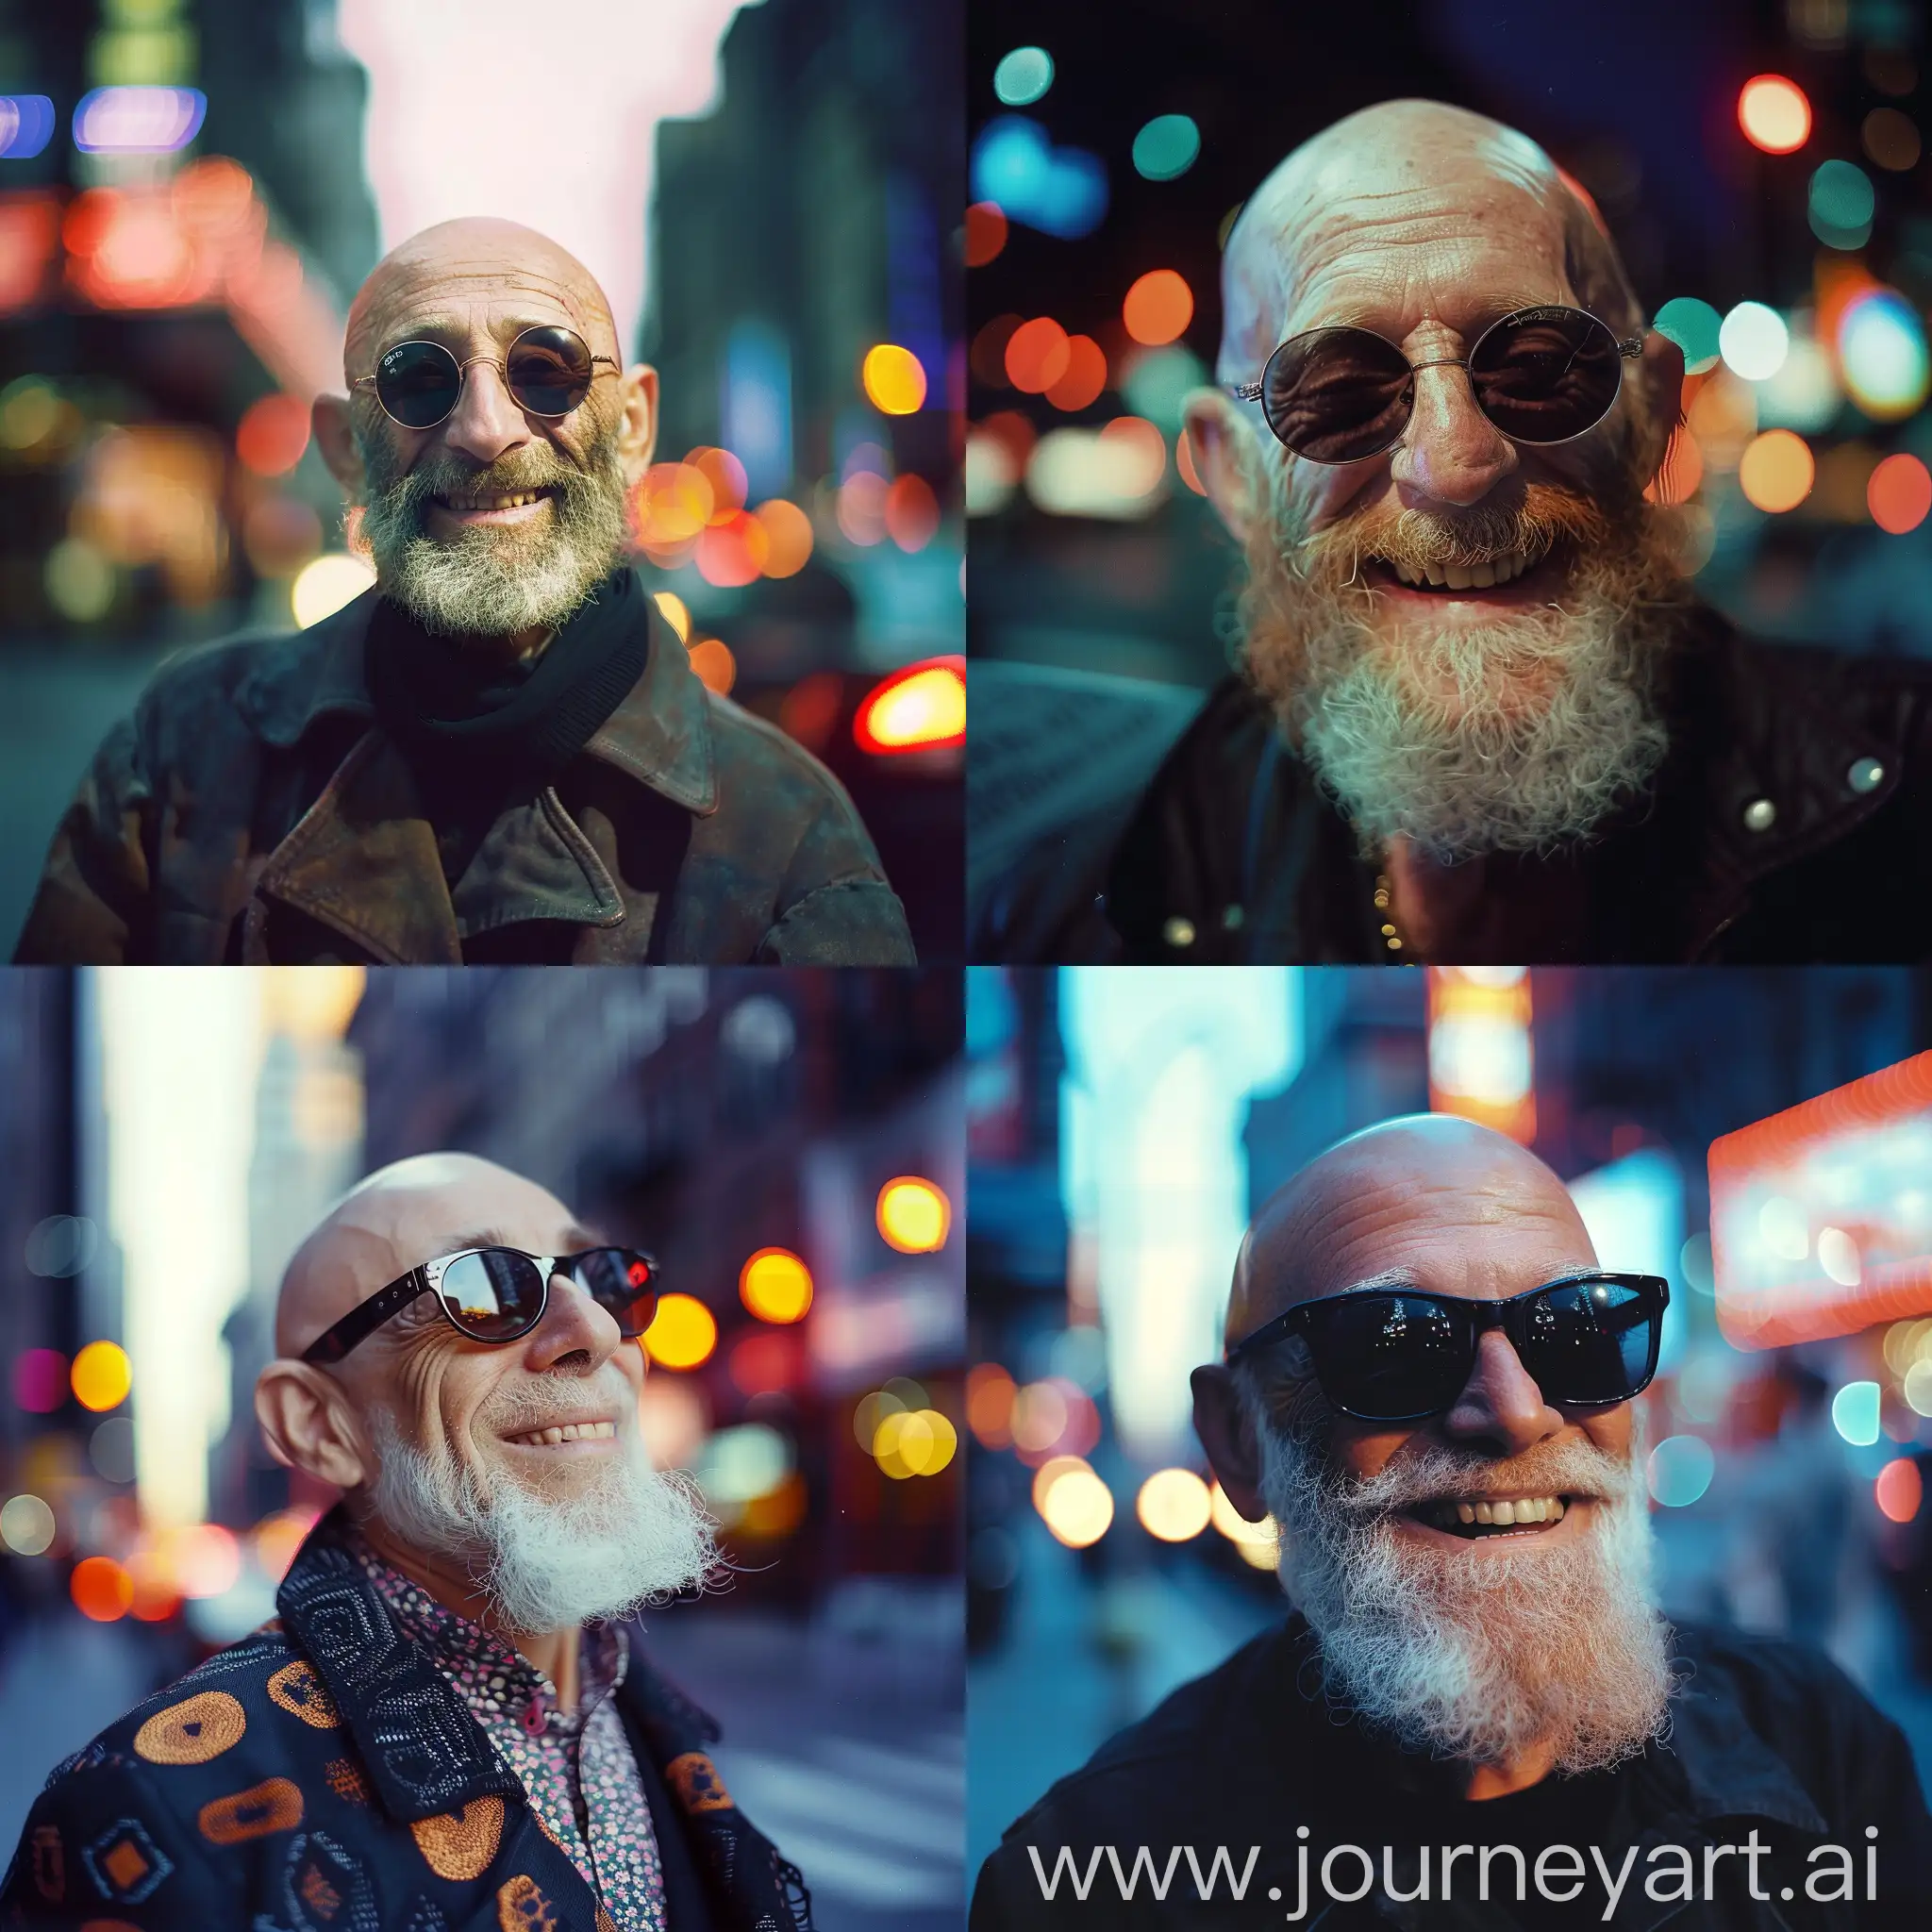 Iconic-Candid-Moment-Smiling-Bearded-Old-Man-with-Sunglasses-in-Vaporpunk-Style